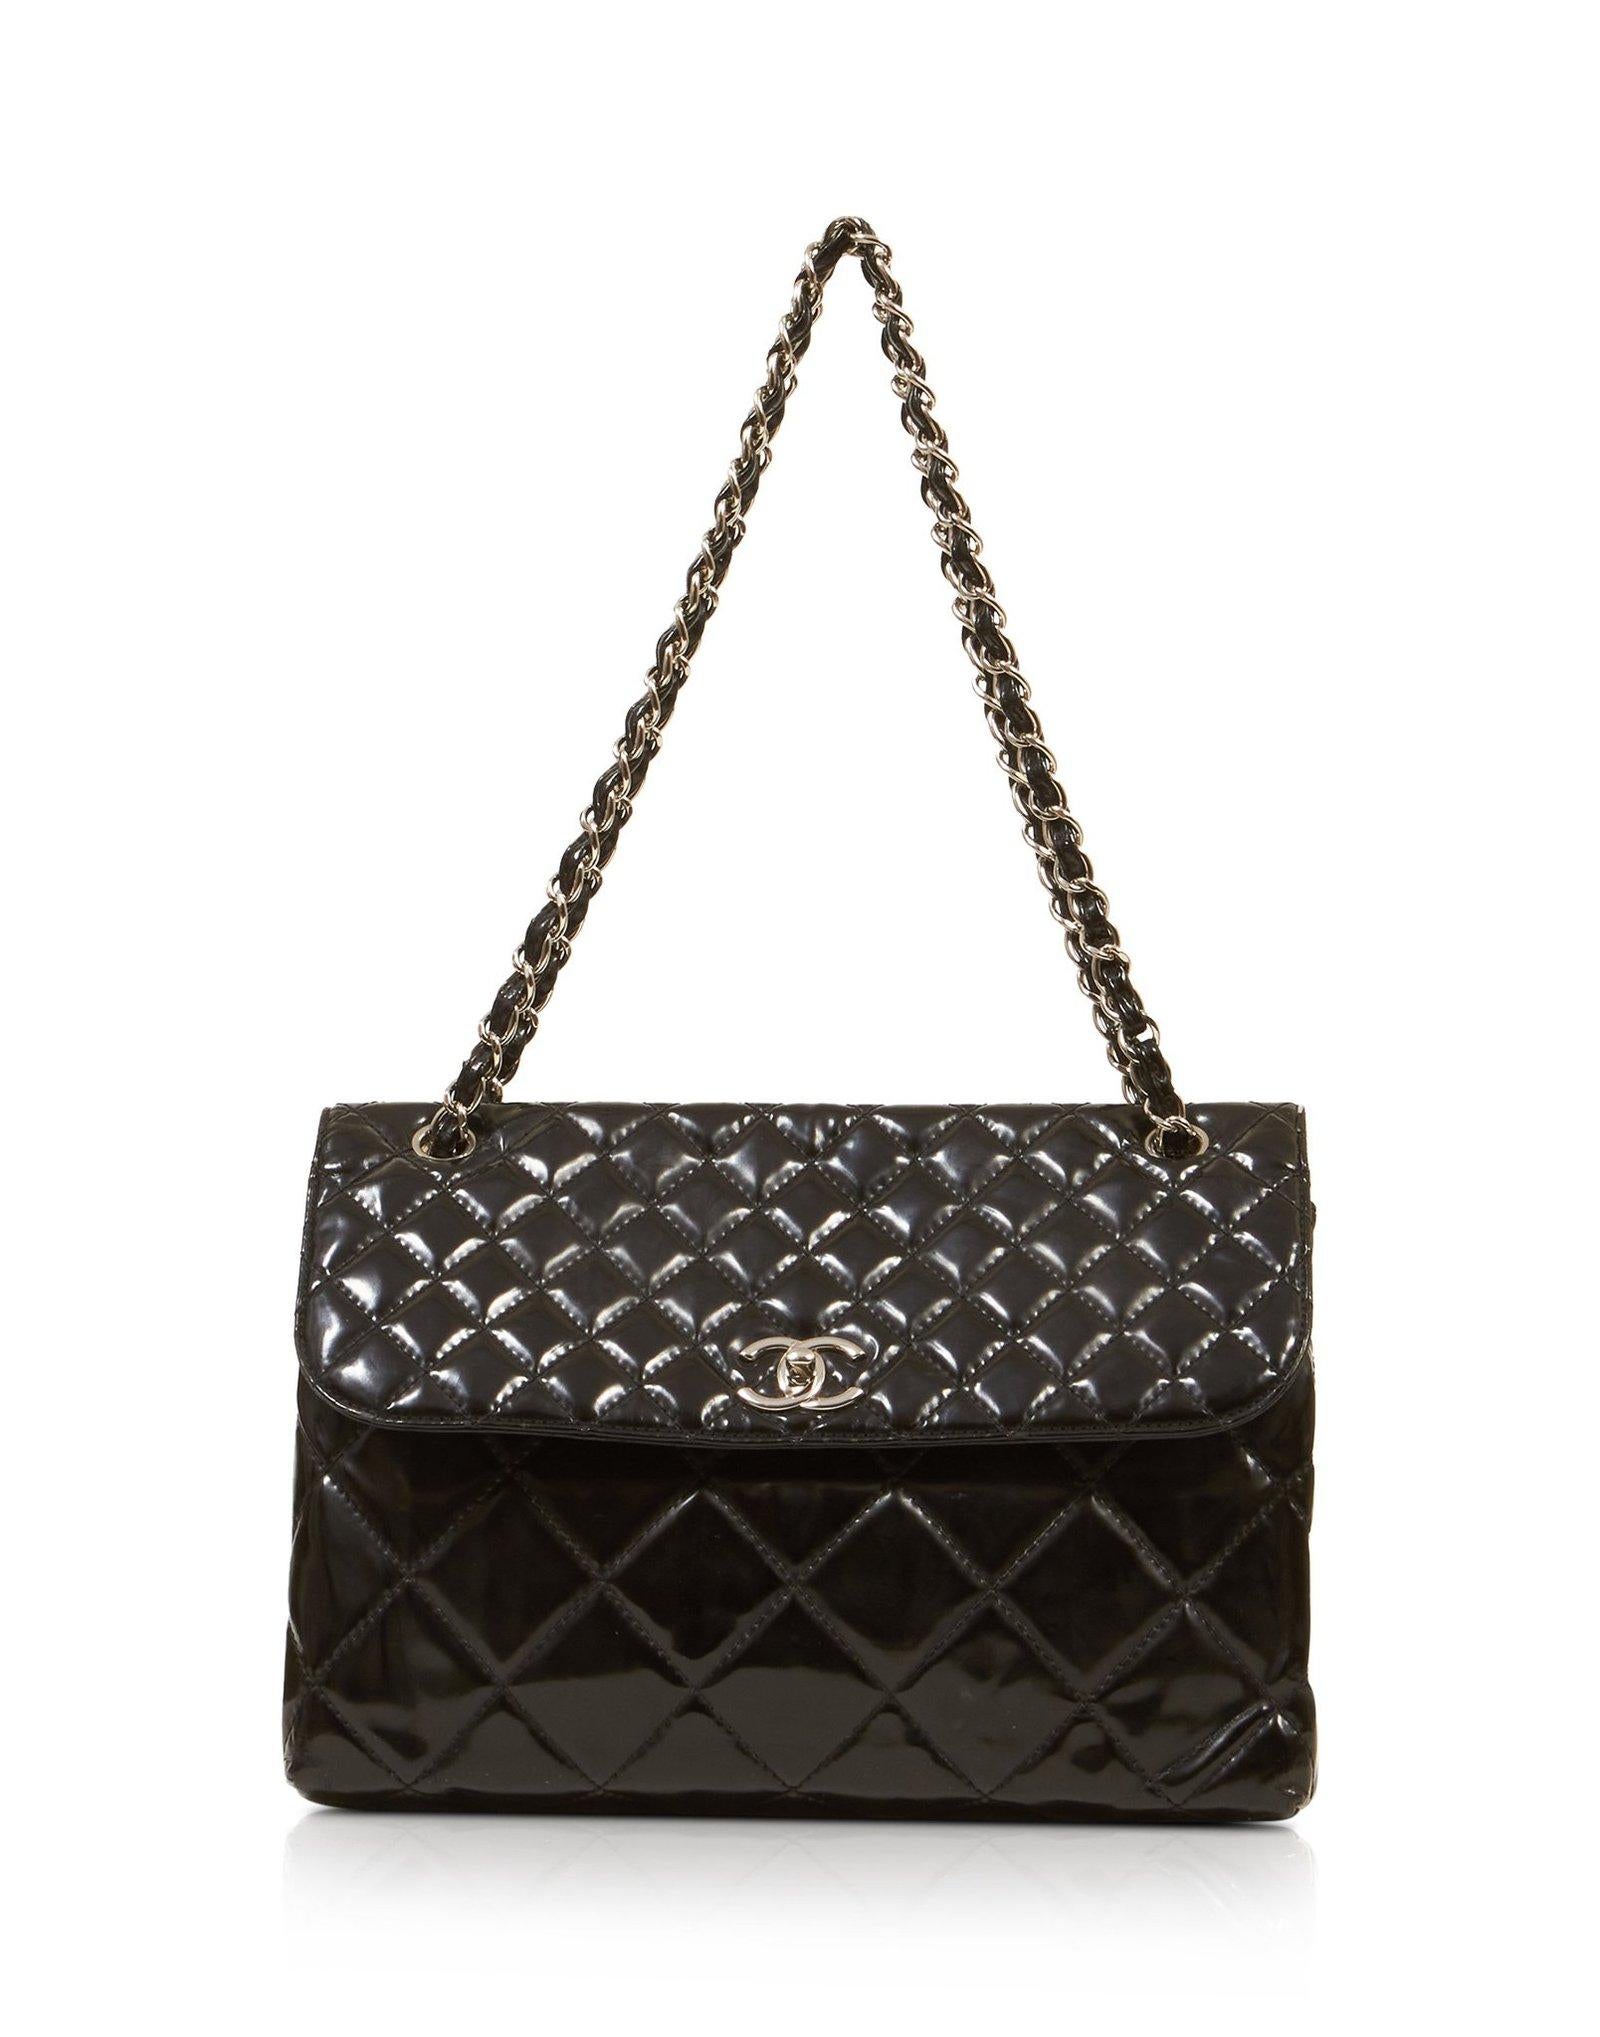 This business flap maxi shoulder bag is made of large diamond shaped quilted patent leather. The bag features silver chain link shoulder straps threaded with leather and a silver Chanel CC Mademoiselle turn lock. This flap opens to a fabric